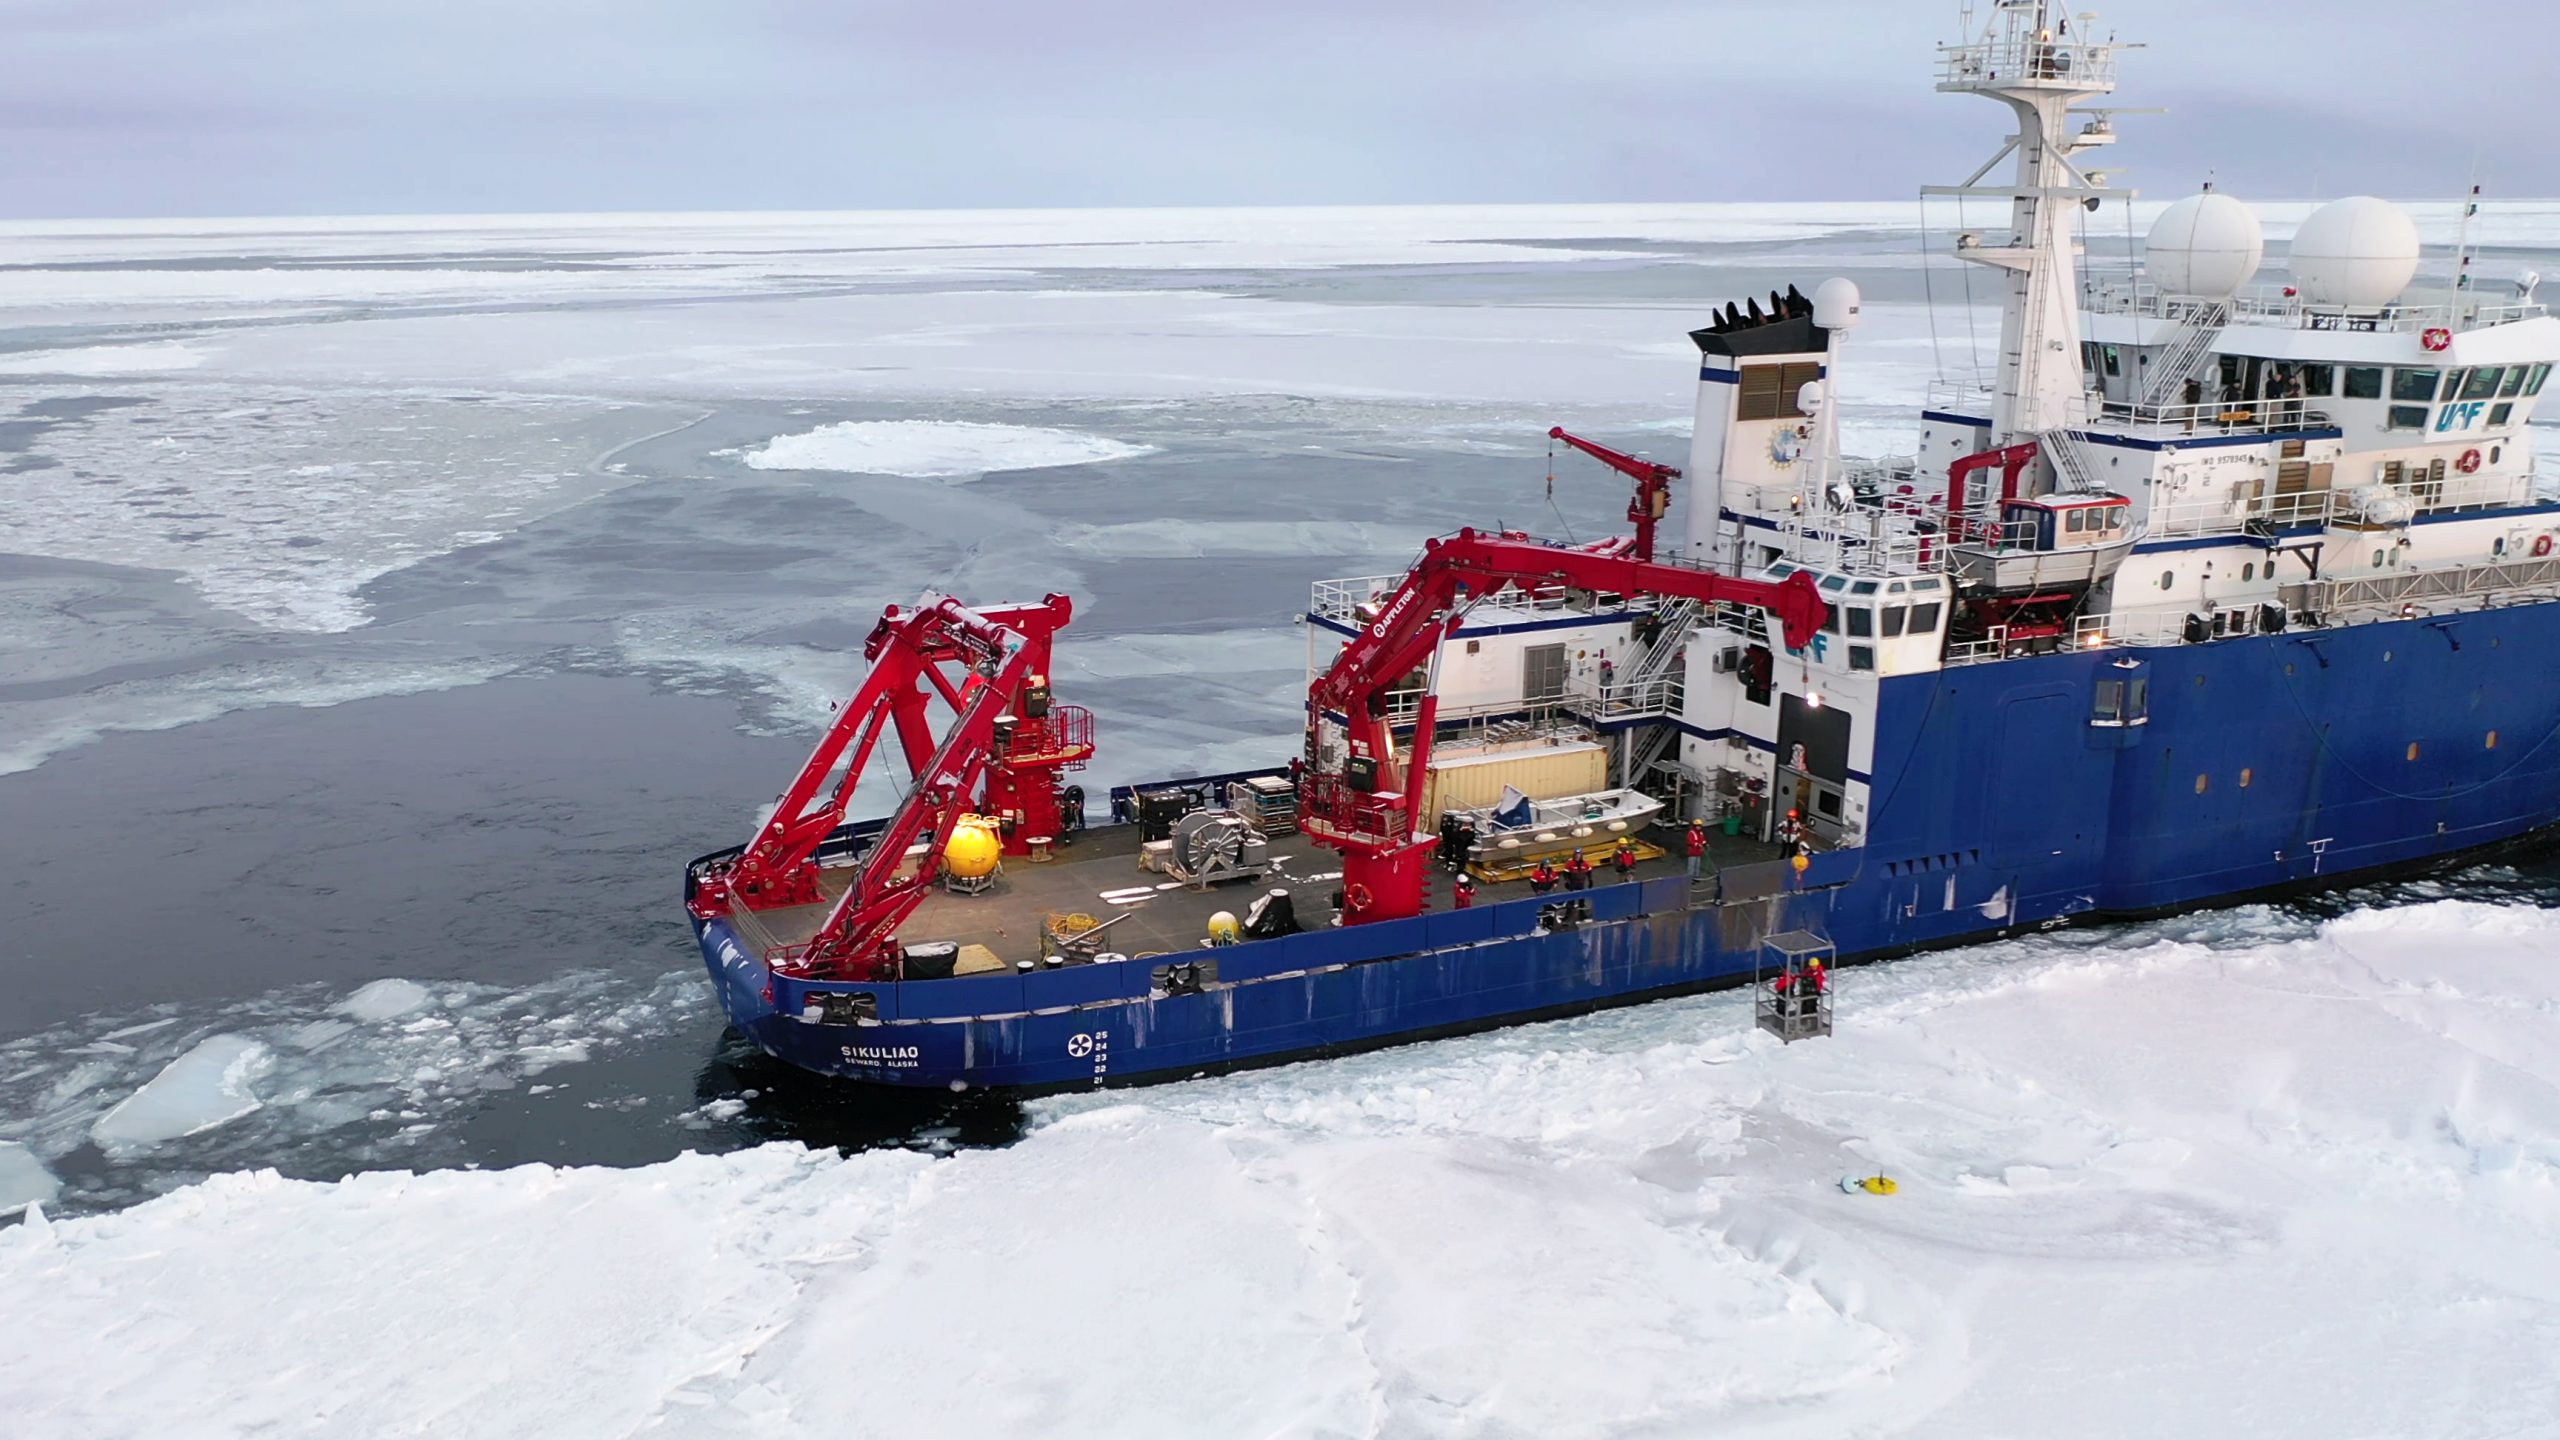 Photo by Ethan Roth. Sikuliaq supports scientific research in the Beaufort Sea in October 2020. The ship can break through ice 3 feet thick.